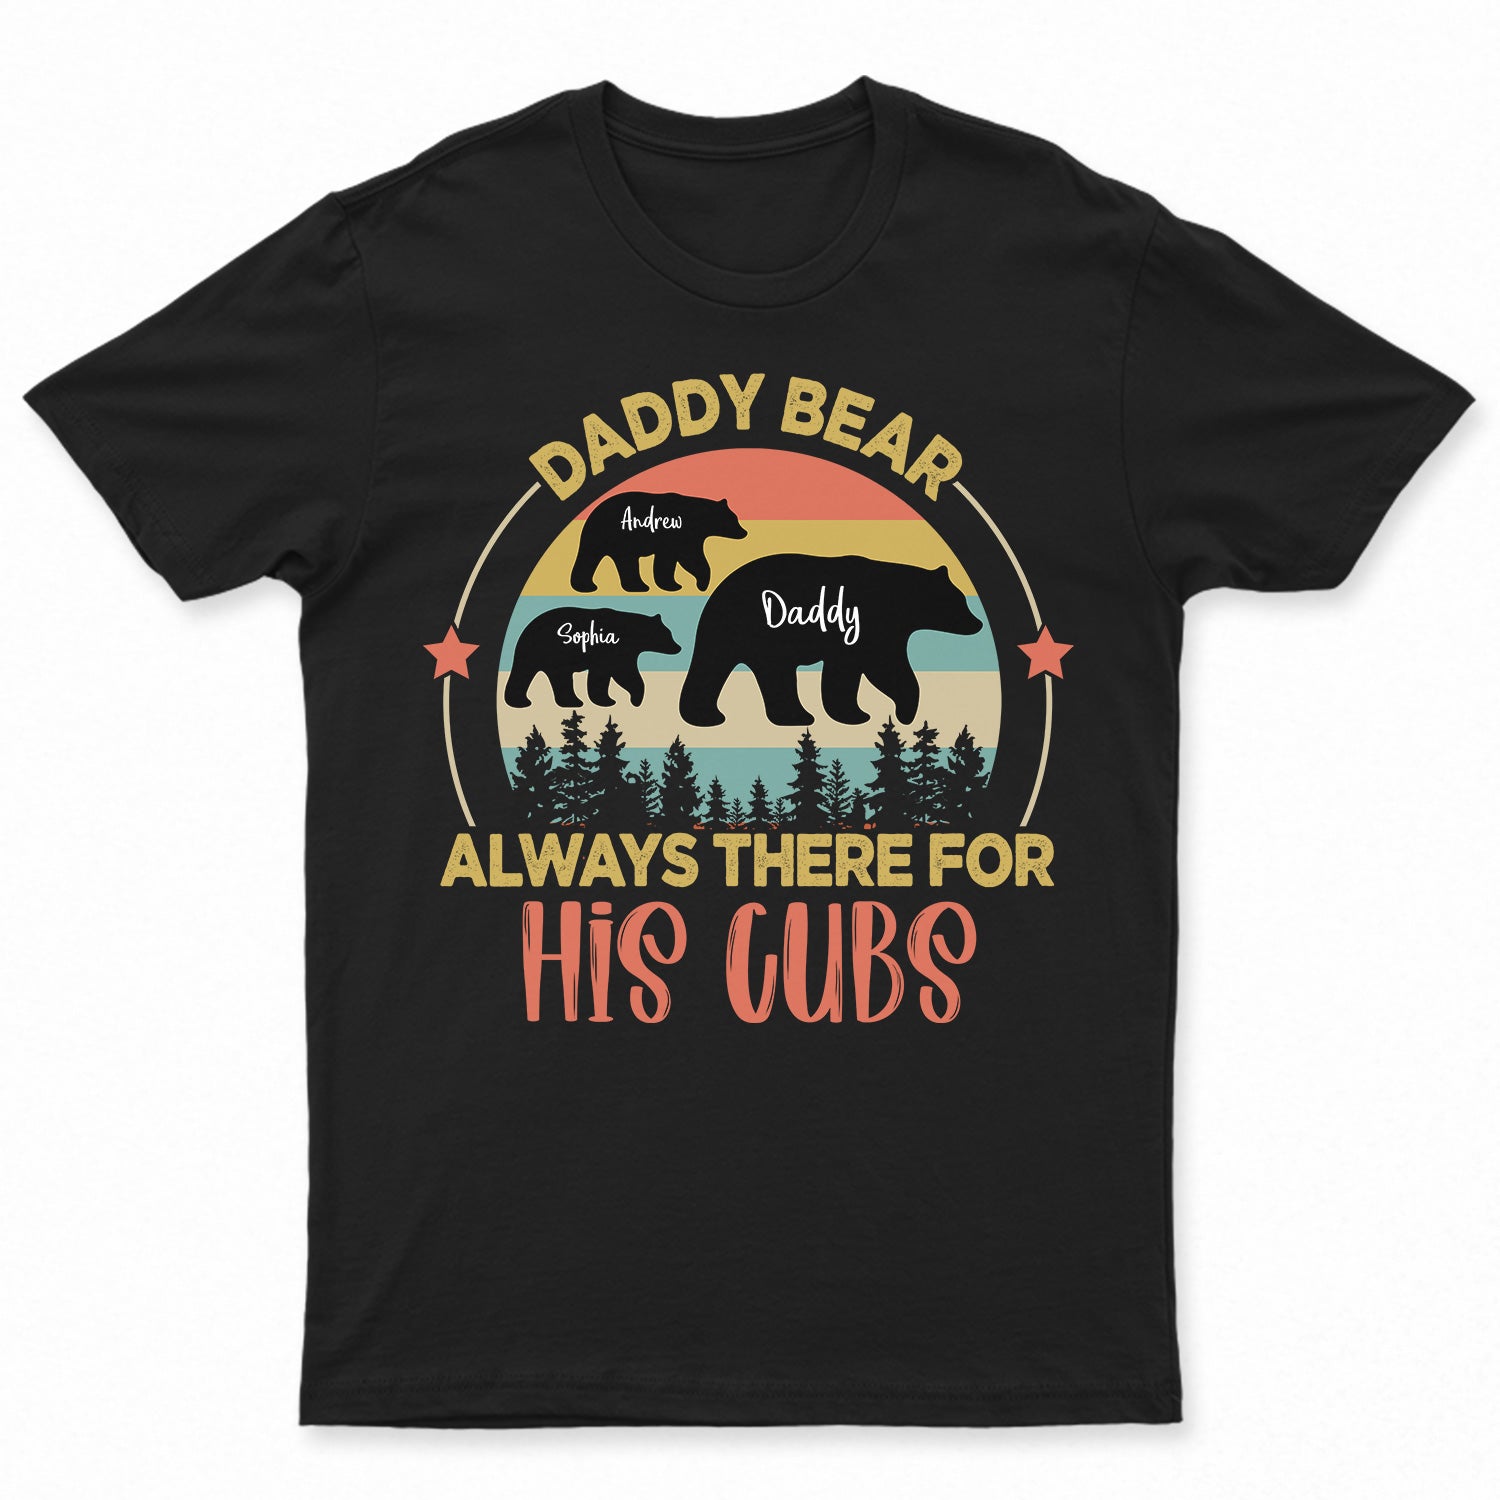 Daddy Bear Always There For His Cubs - Birthday, Loving Gift For Dad, Father, Grandpa, Grandfather, Daughters, Sons - Personalized Custom T Shirt